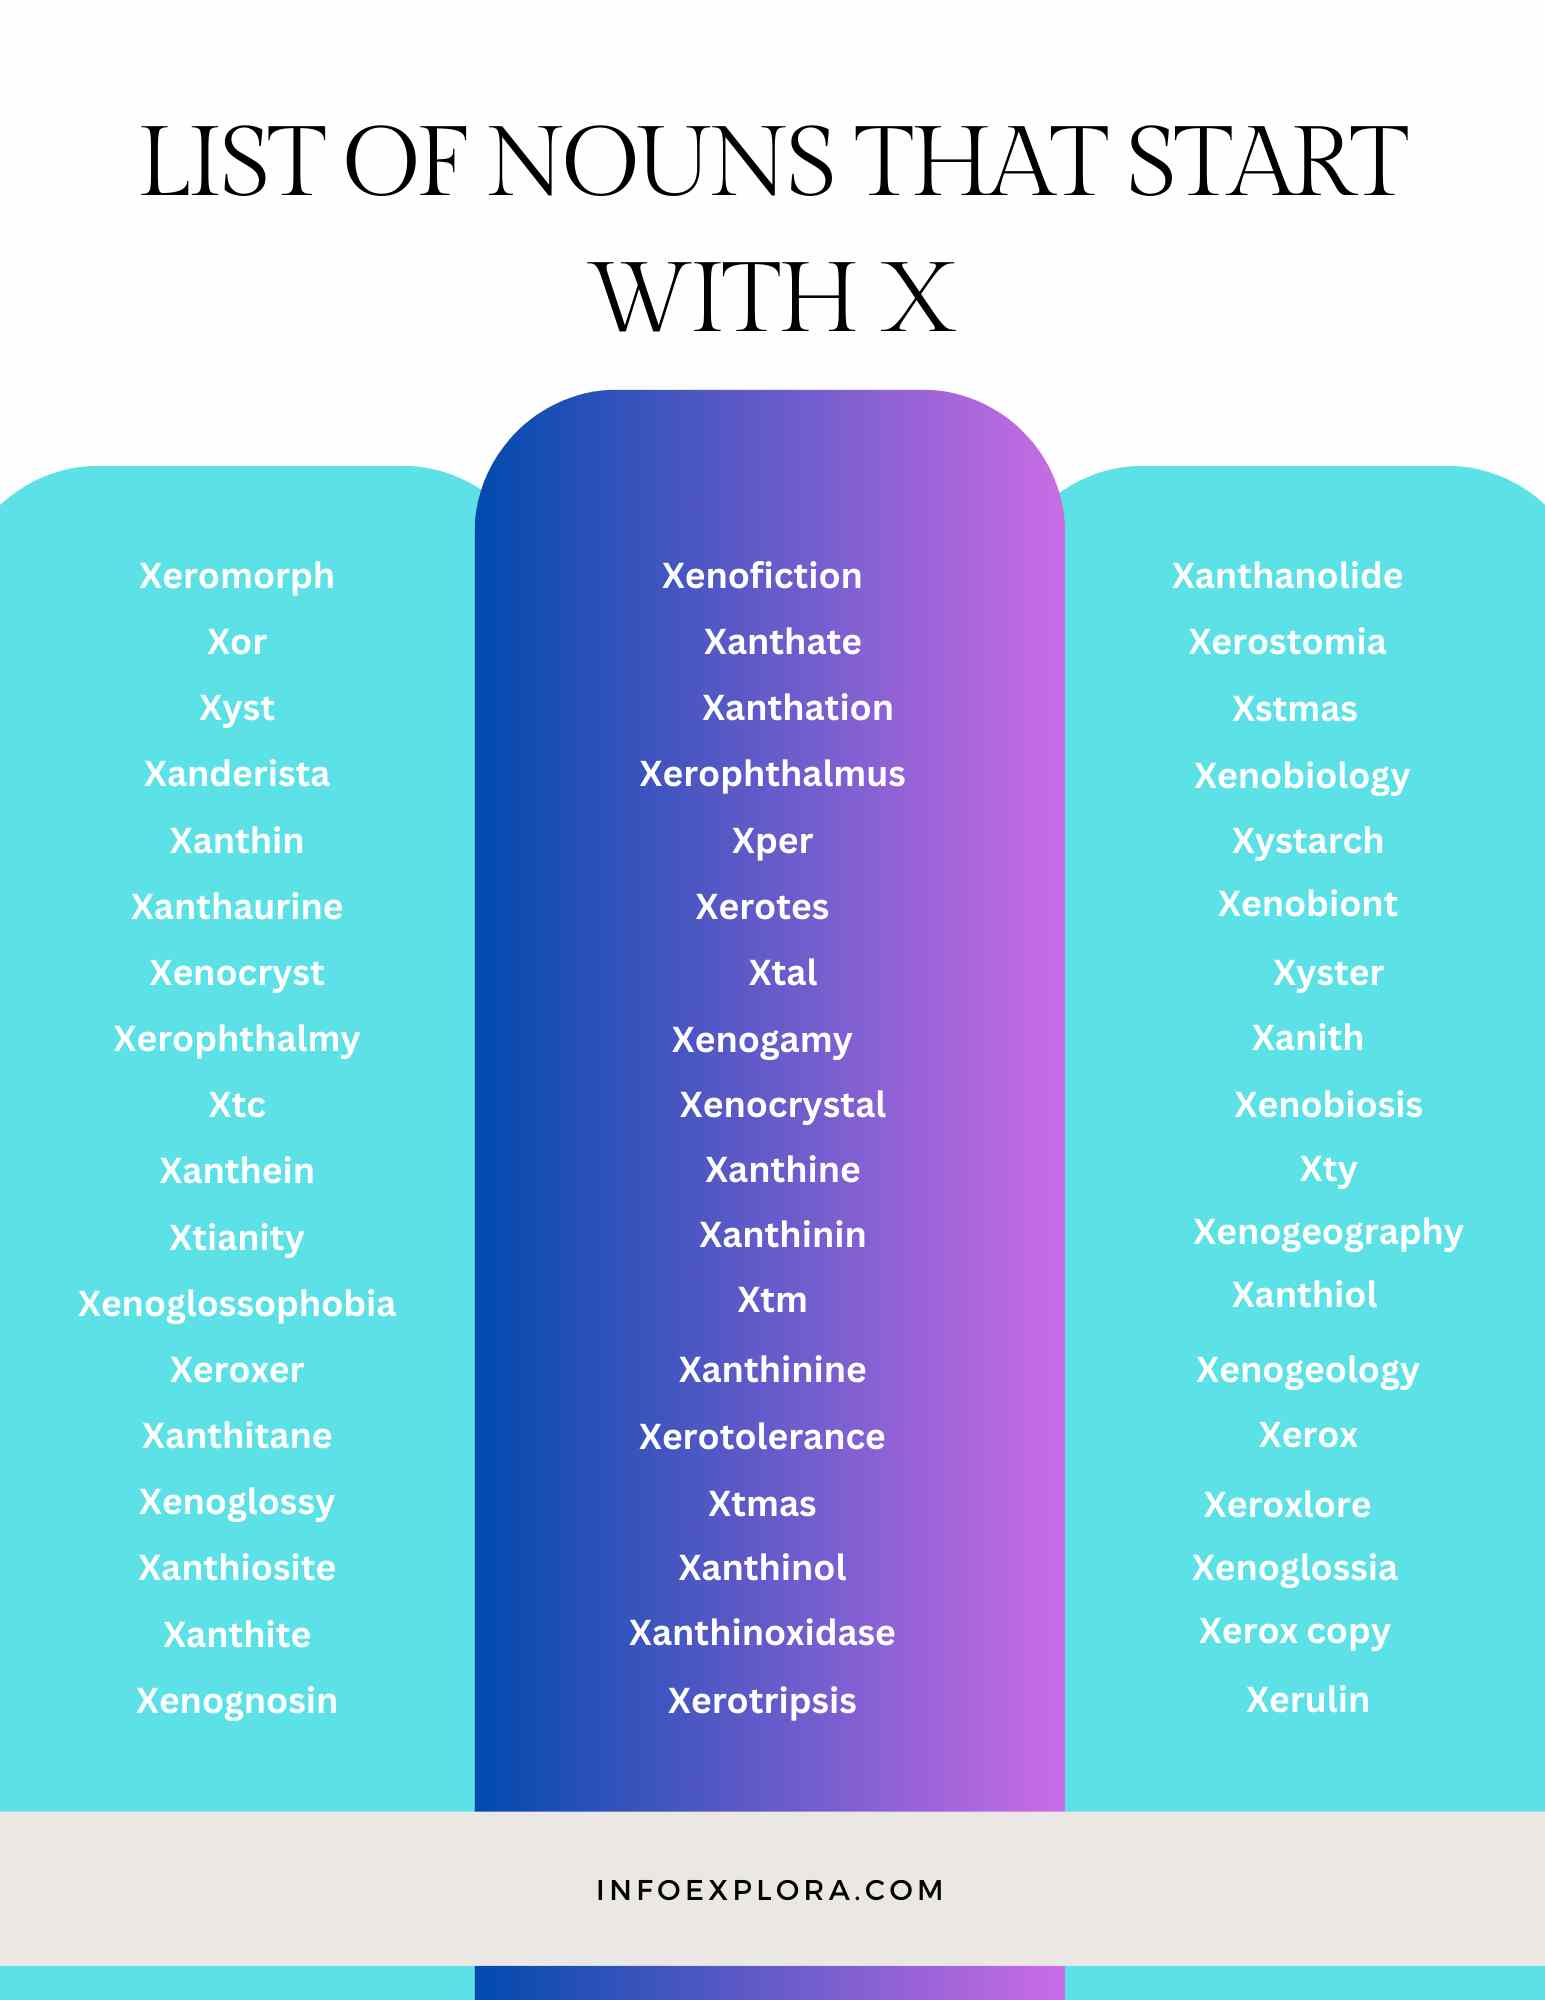 Nouns that Start With X